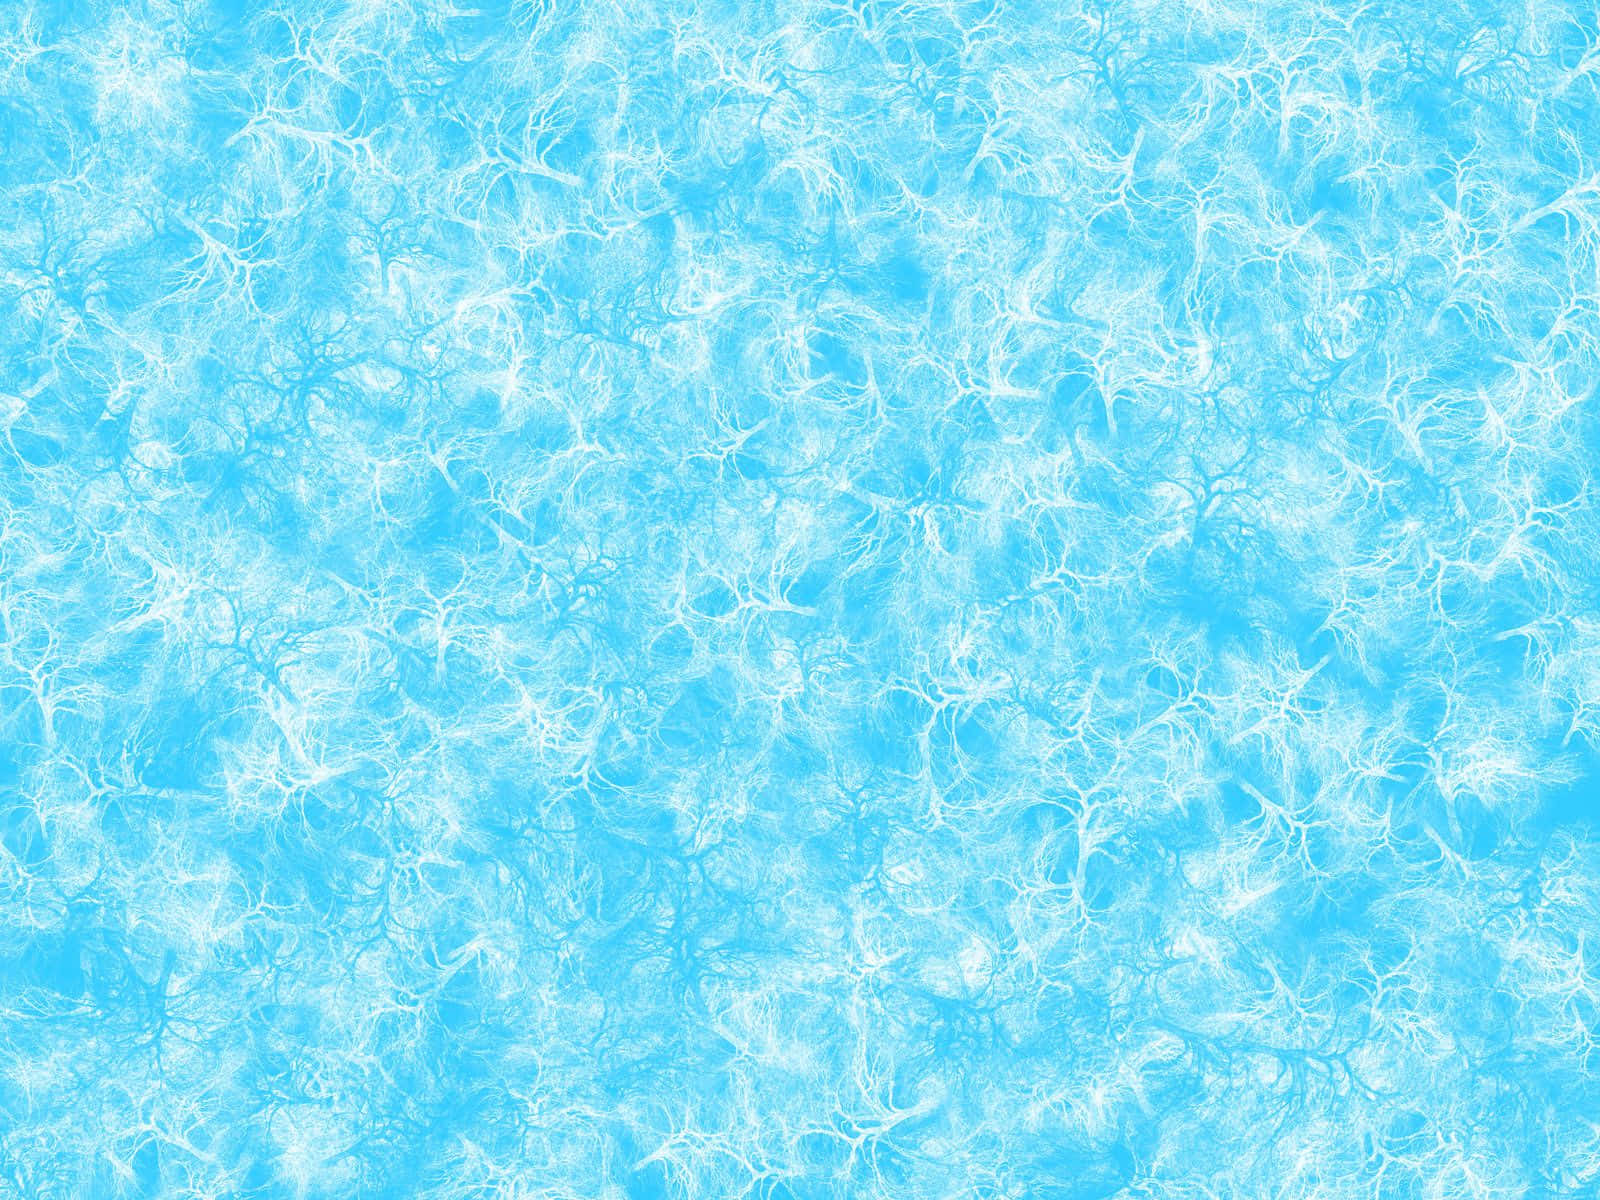 Blue Water Texture Pictures